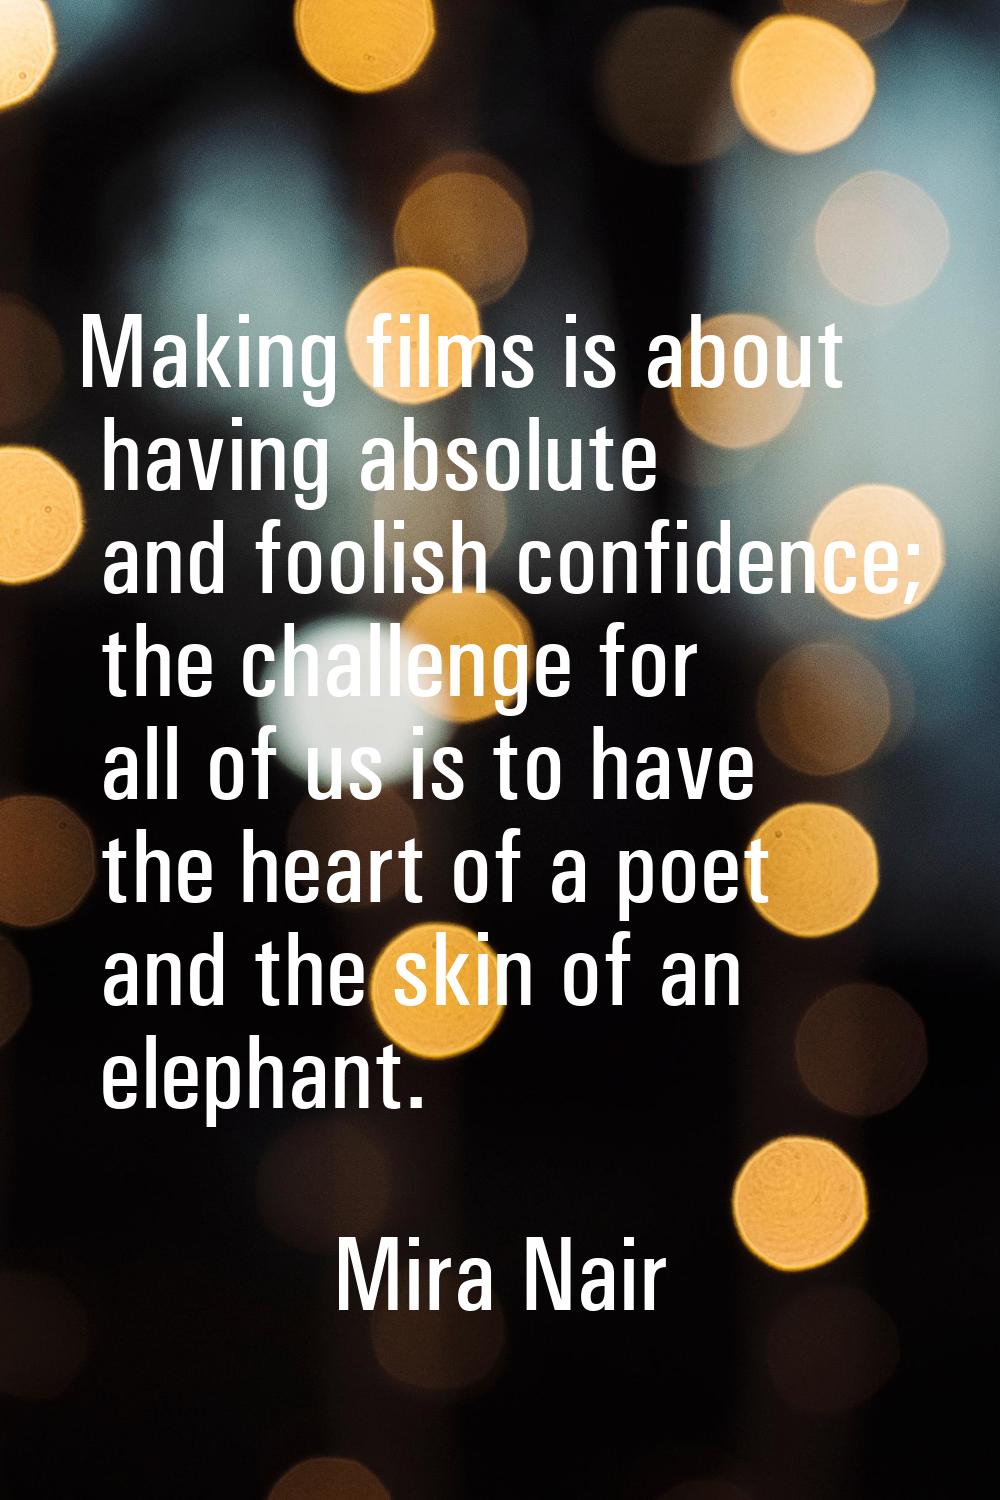 Making films is about having absolute and foolish confidence; the challenge for all of us is to hav